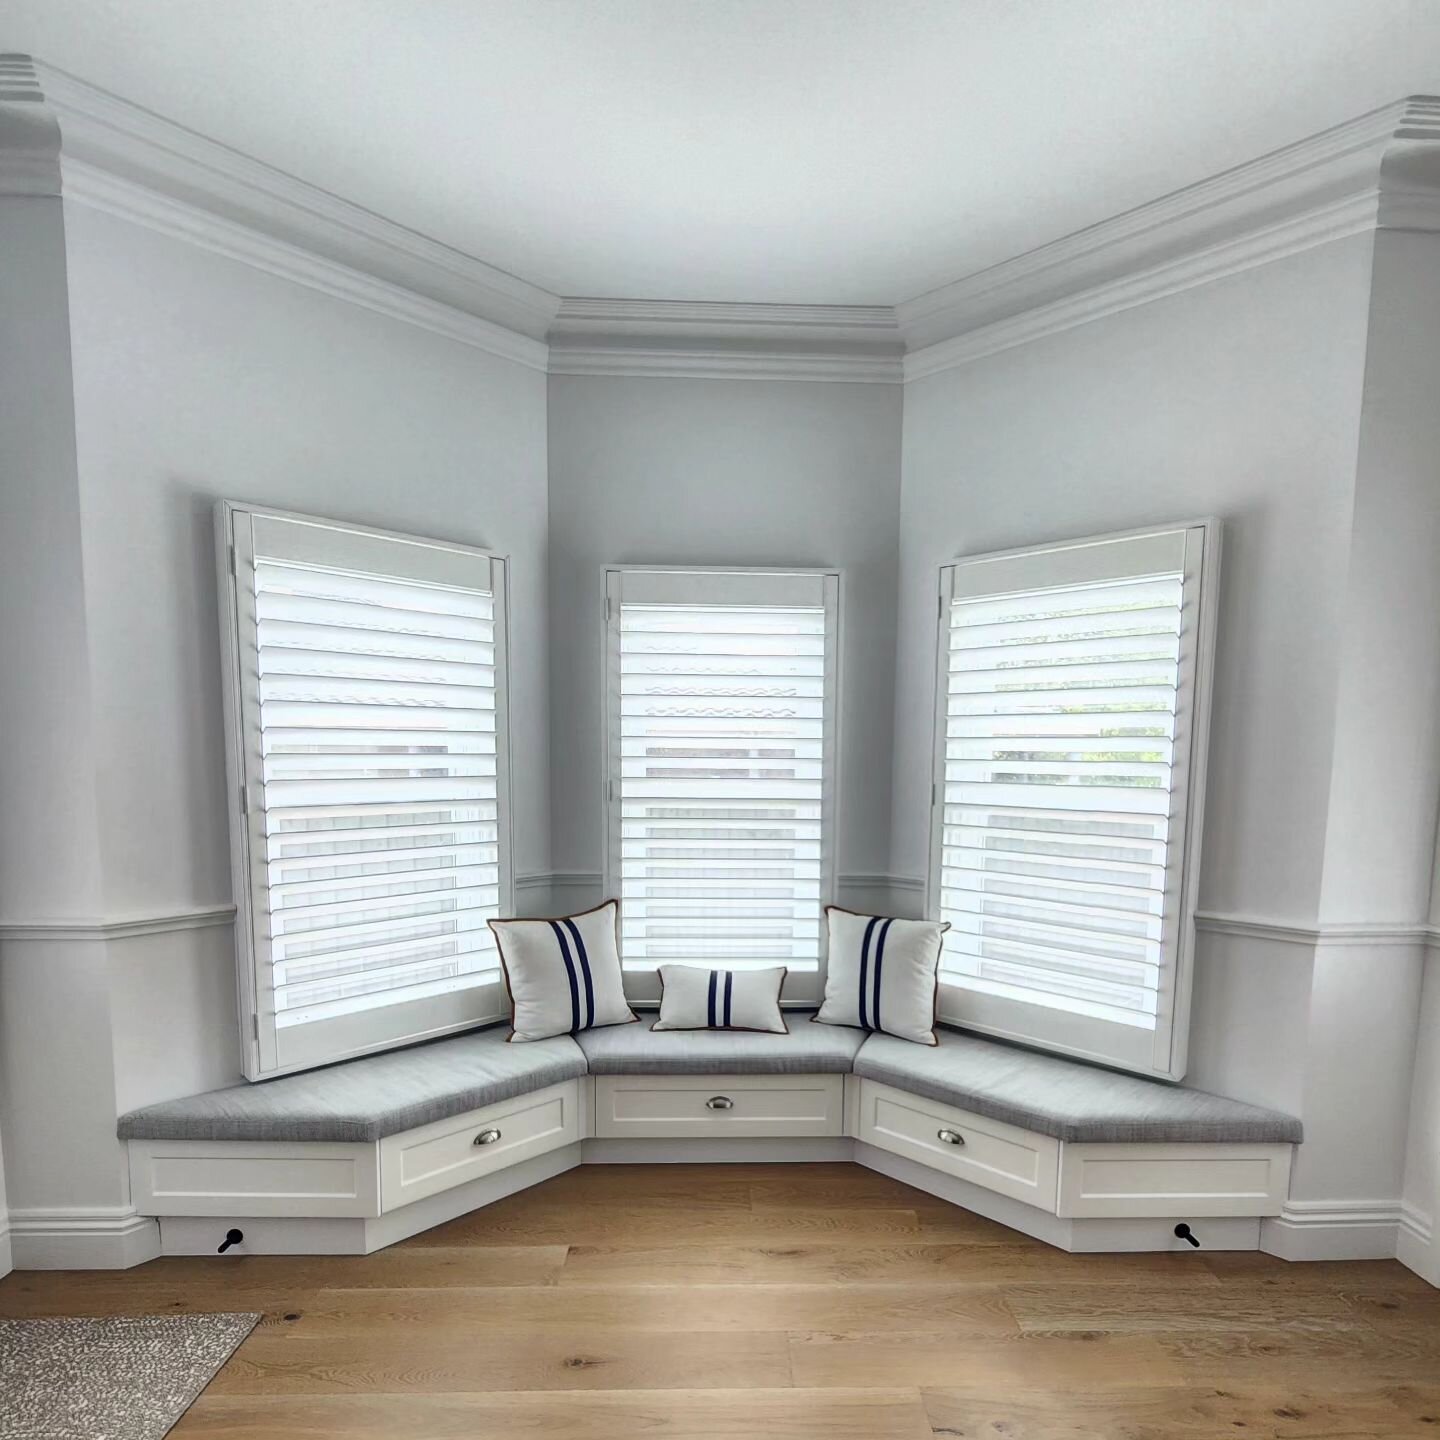 Today Signature Blinds transformed and completely elevated this cozy bay window seating area. Our clients can now enjoy the perfect blend of natural light and privacy in style!
.
.
.
.
.
#plantationshutters #windowdecor #interiorstyle #homeimprovemen